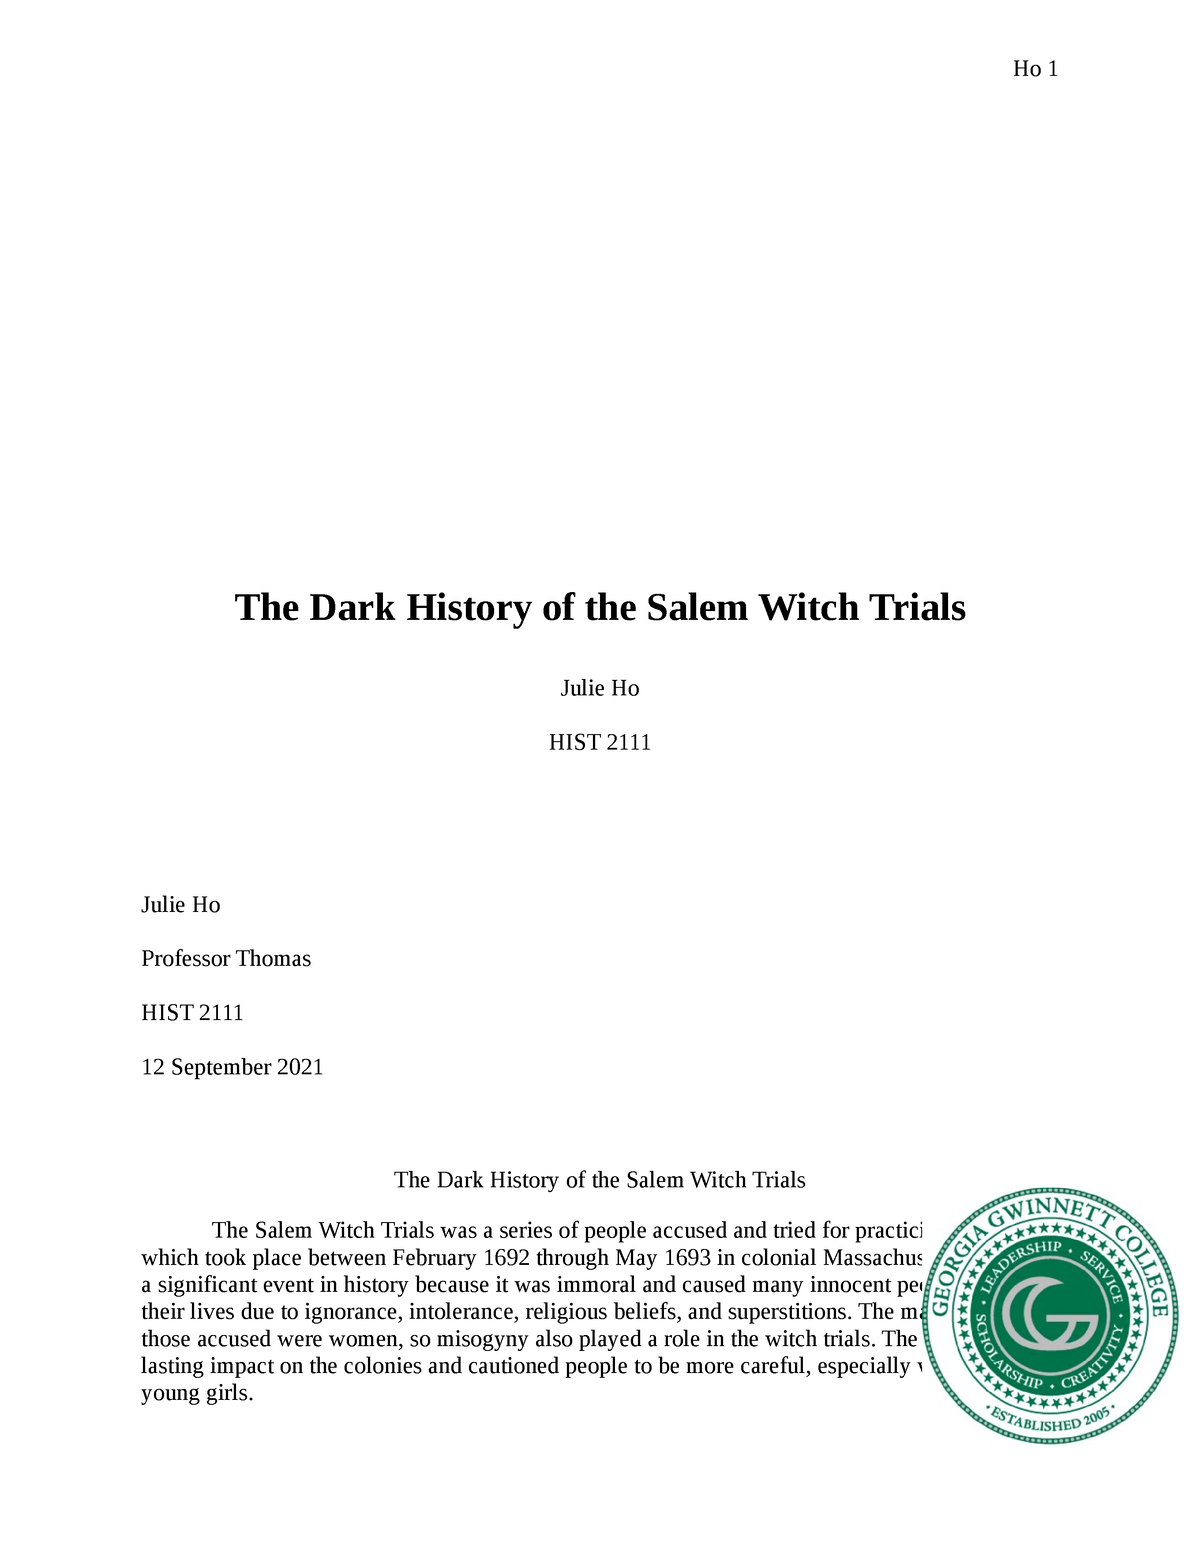 salem witch trials research paper outline